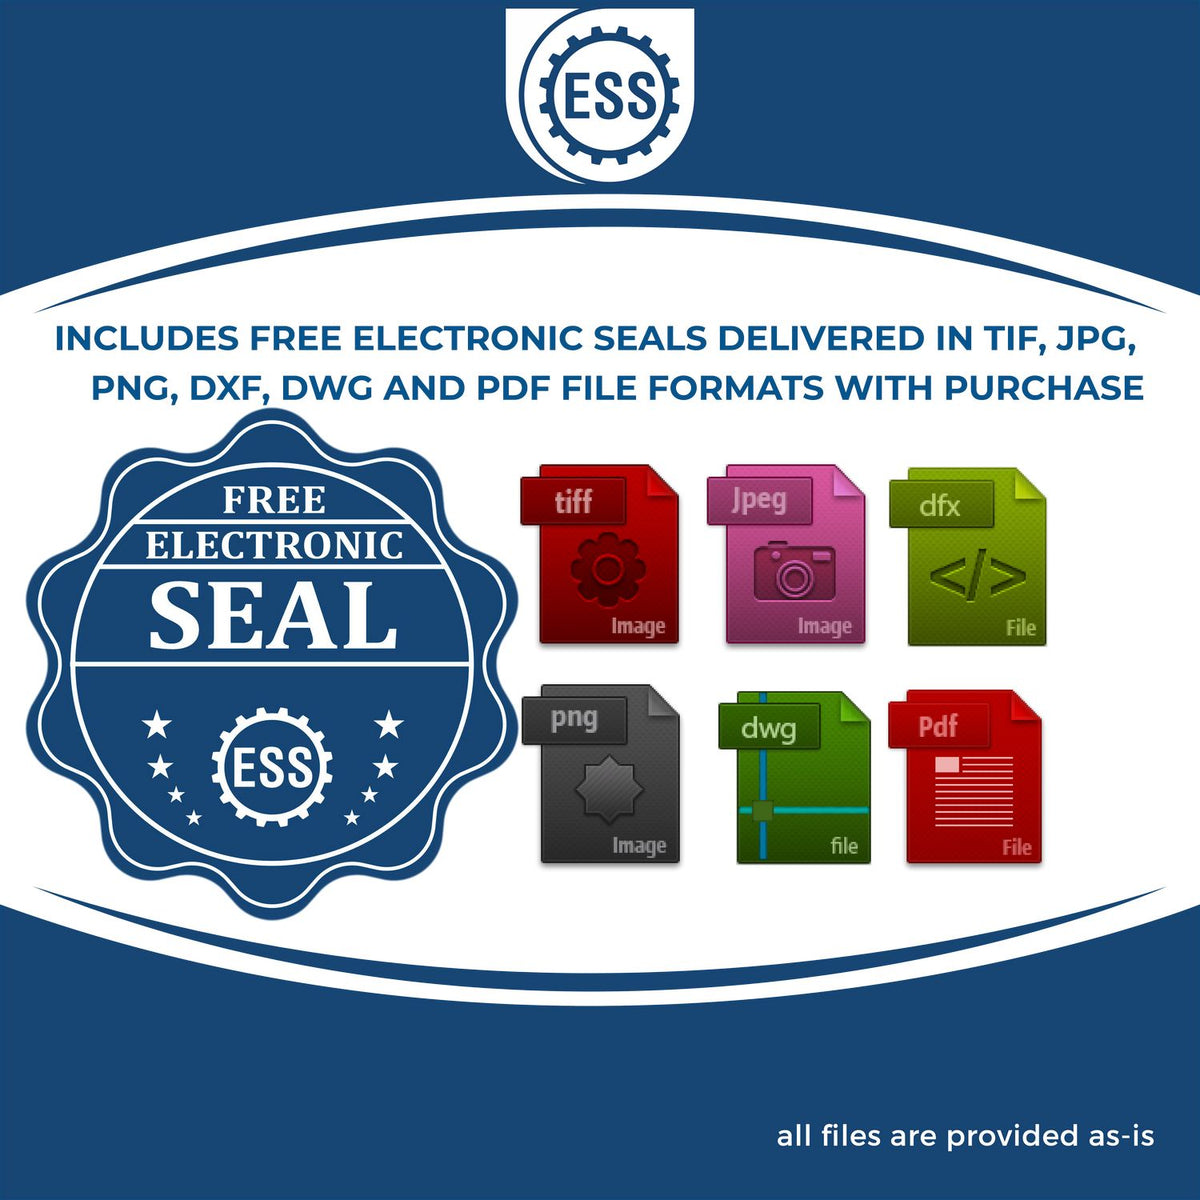 An infographic for the free electronic seal for the Hybrid North Dakota Geologist Seal illustrating the different file type icons such as DXF, DWG, TIF, JPG and PNG.